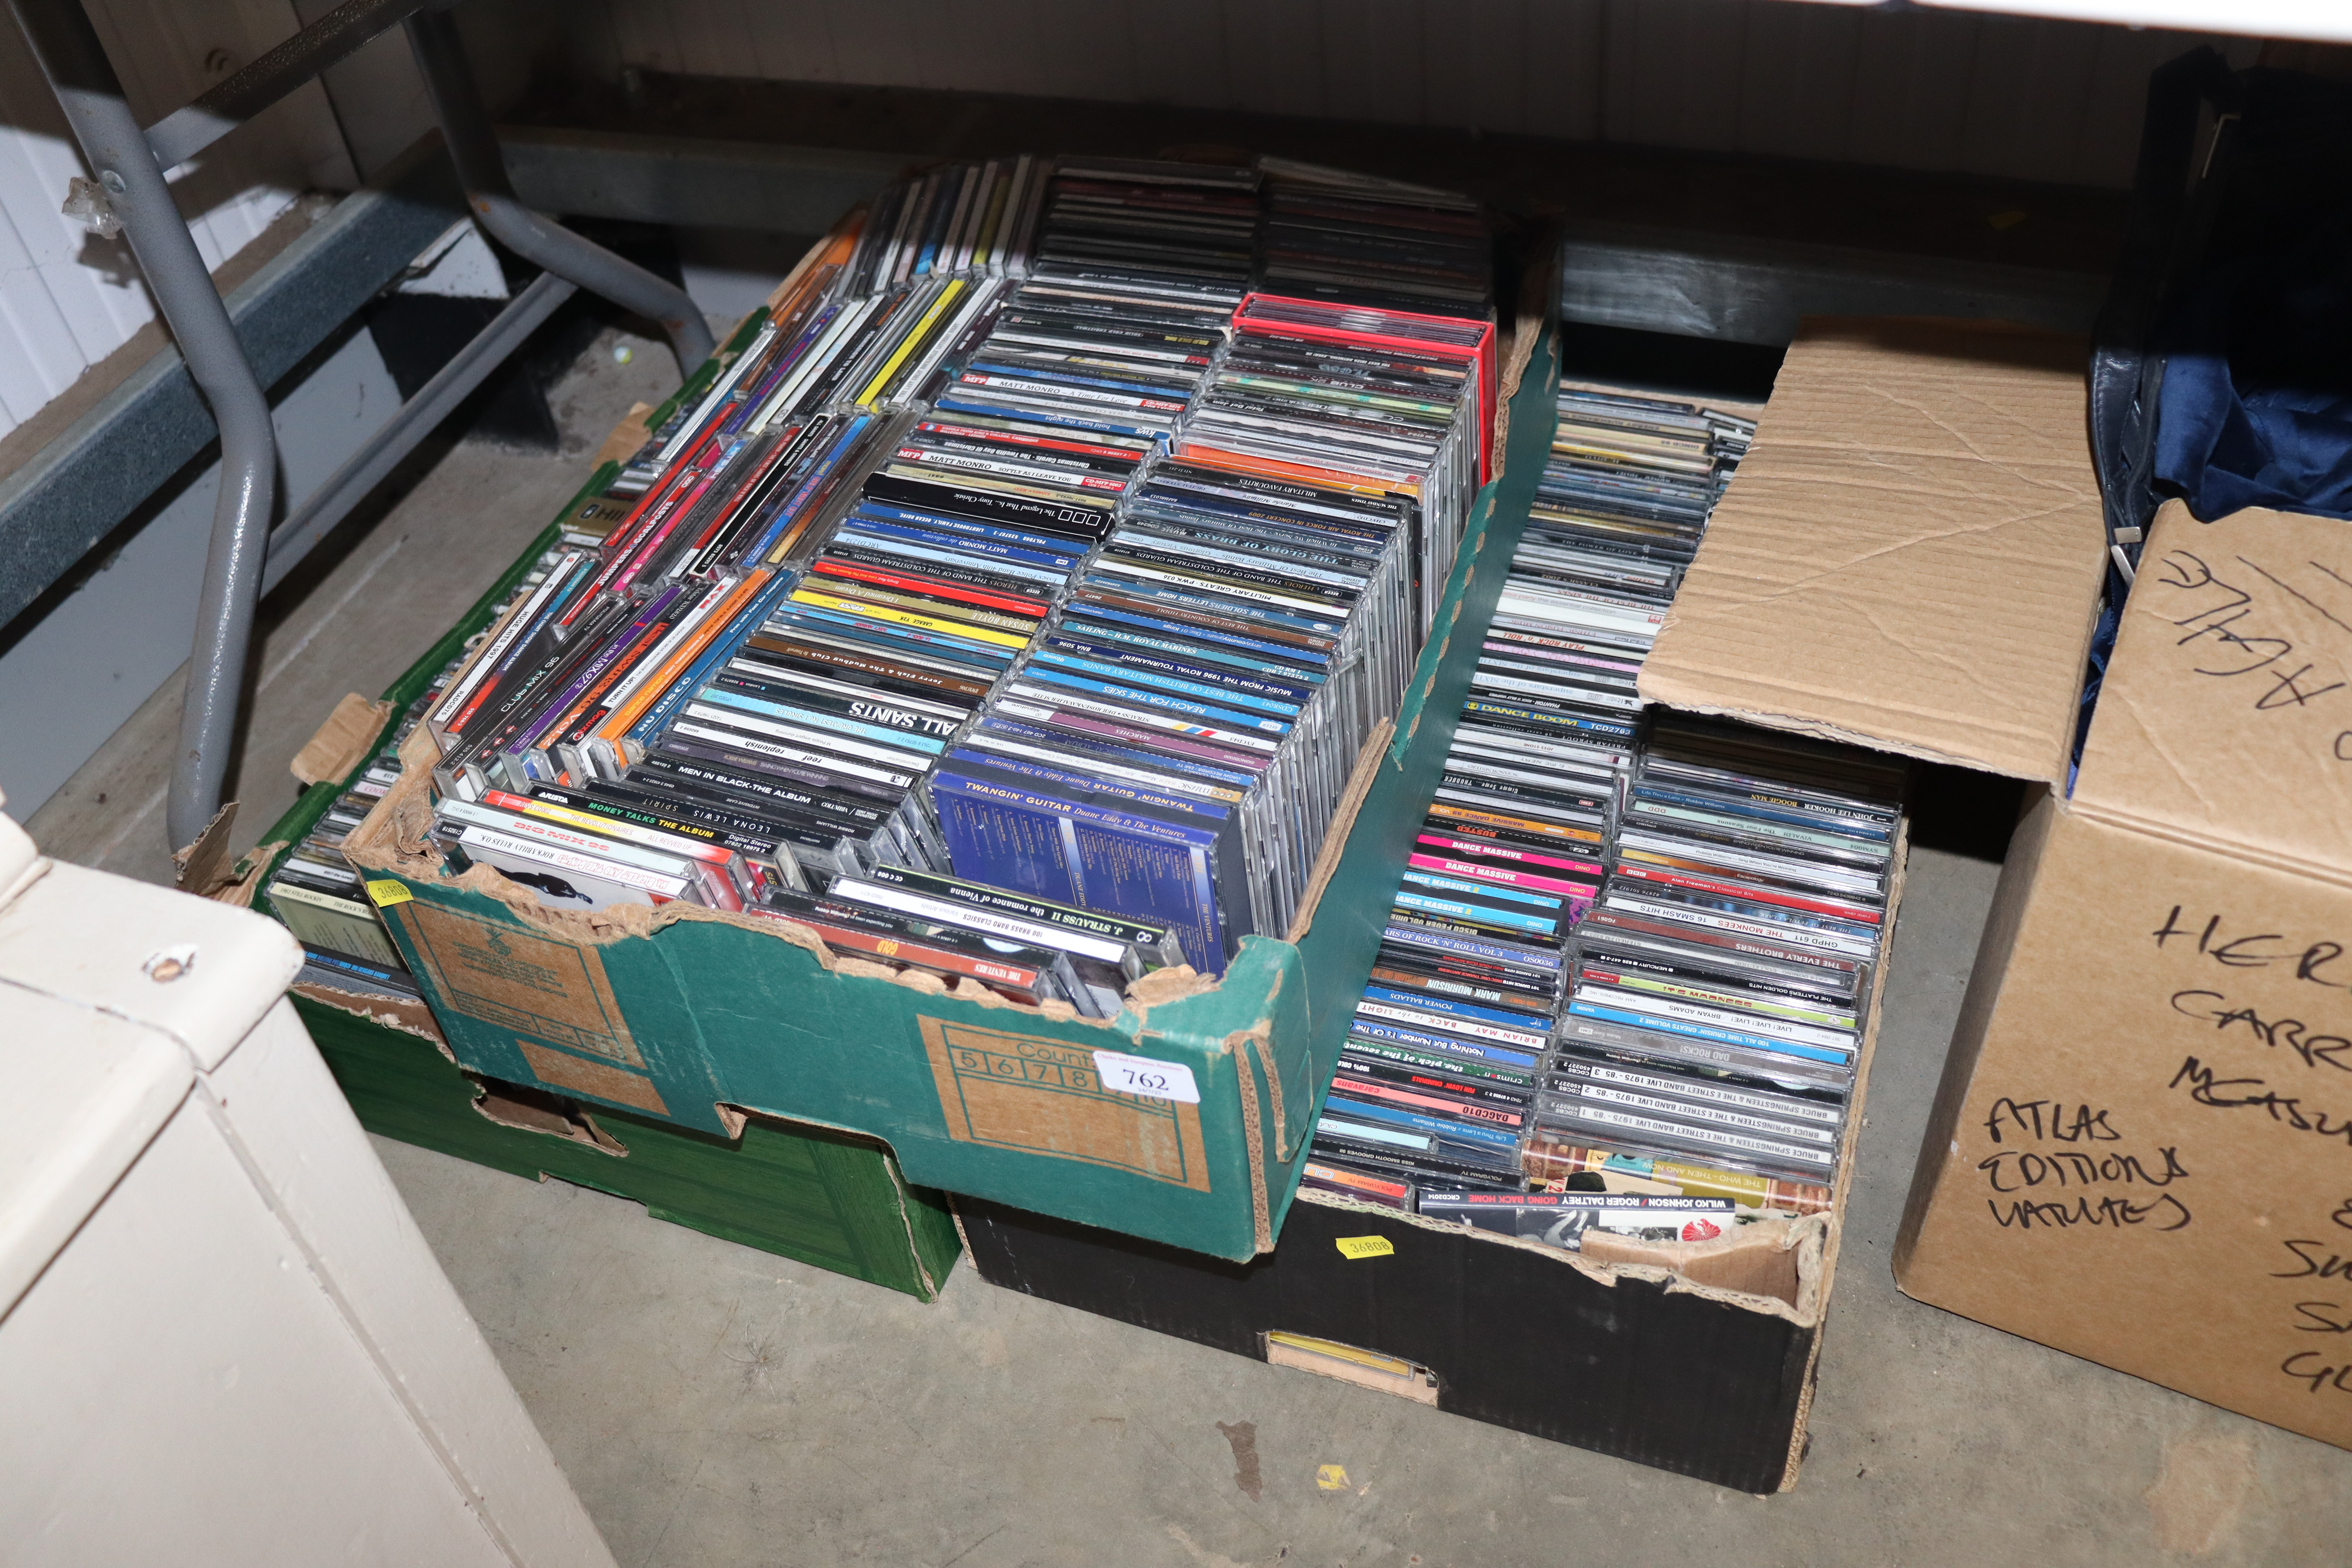 Three boxes of CDs